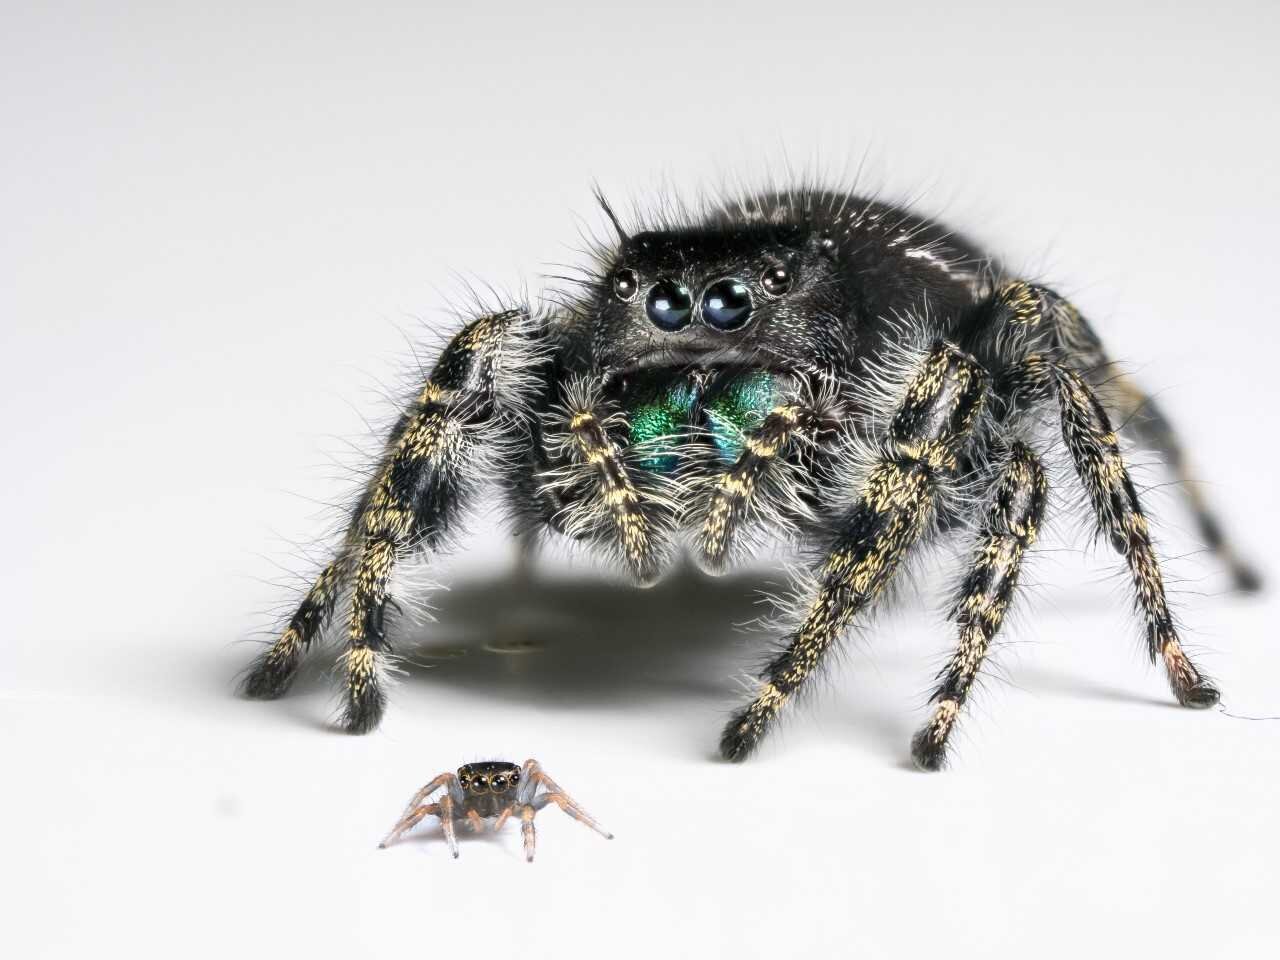 Baby jumping spiders can see nearly as well as their parents